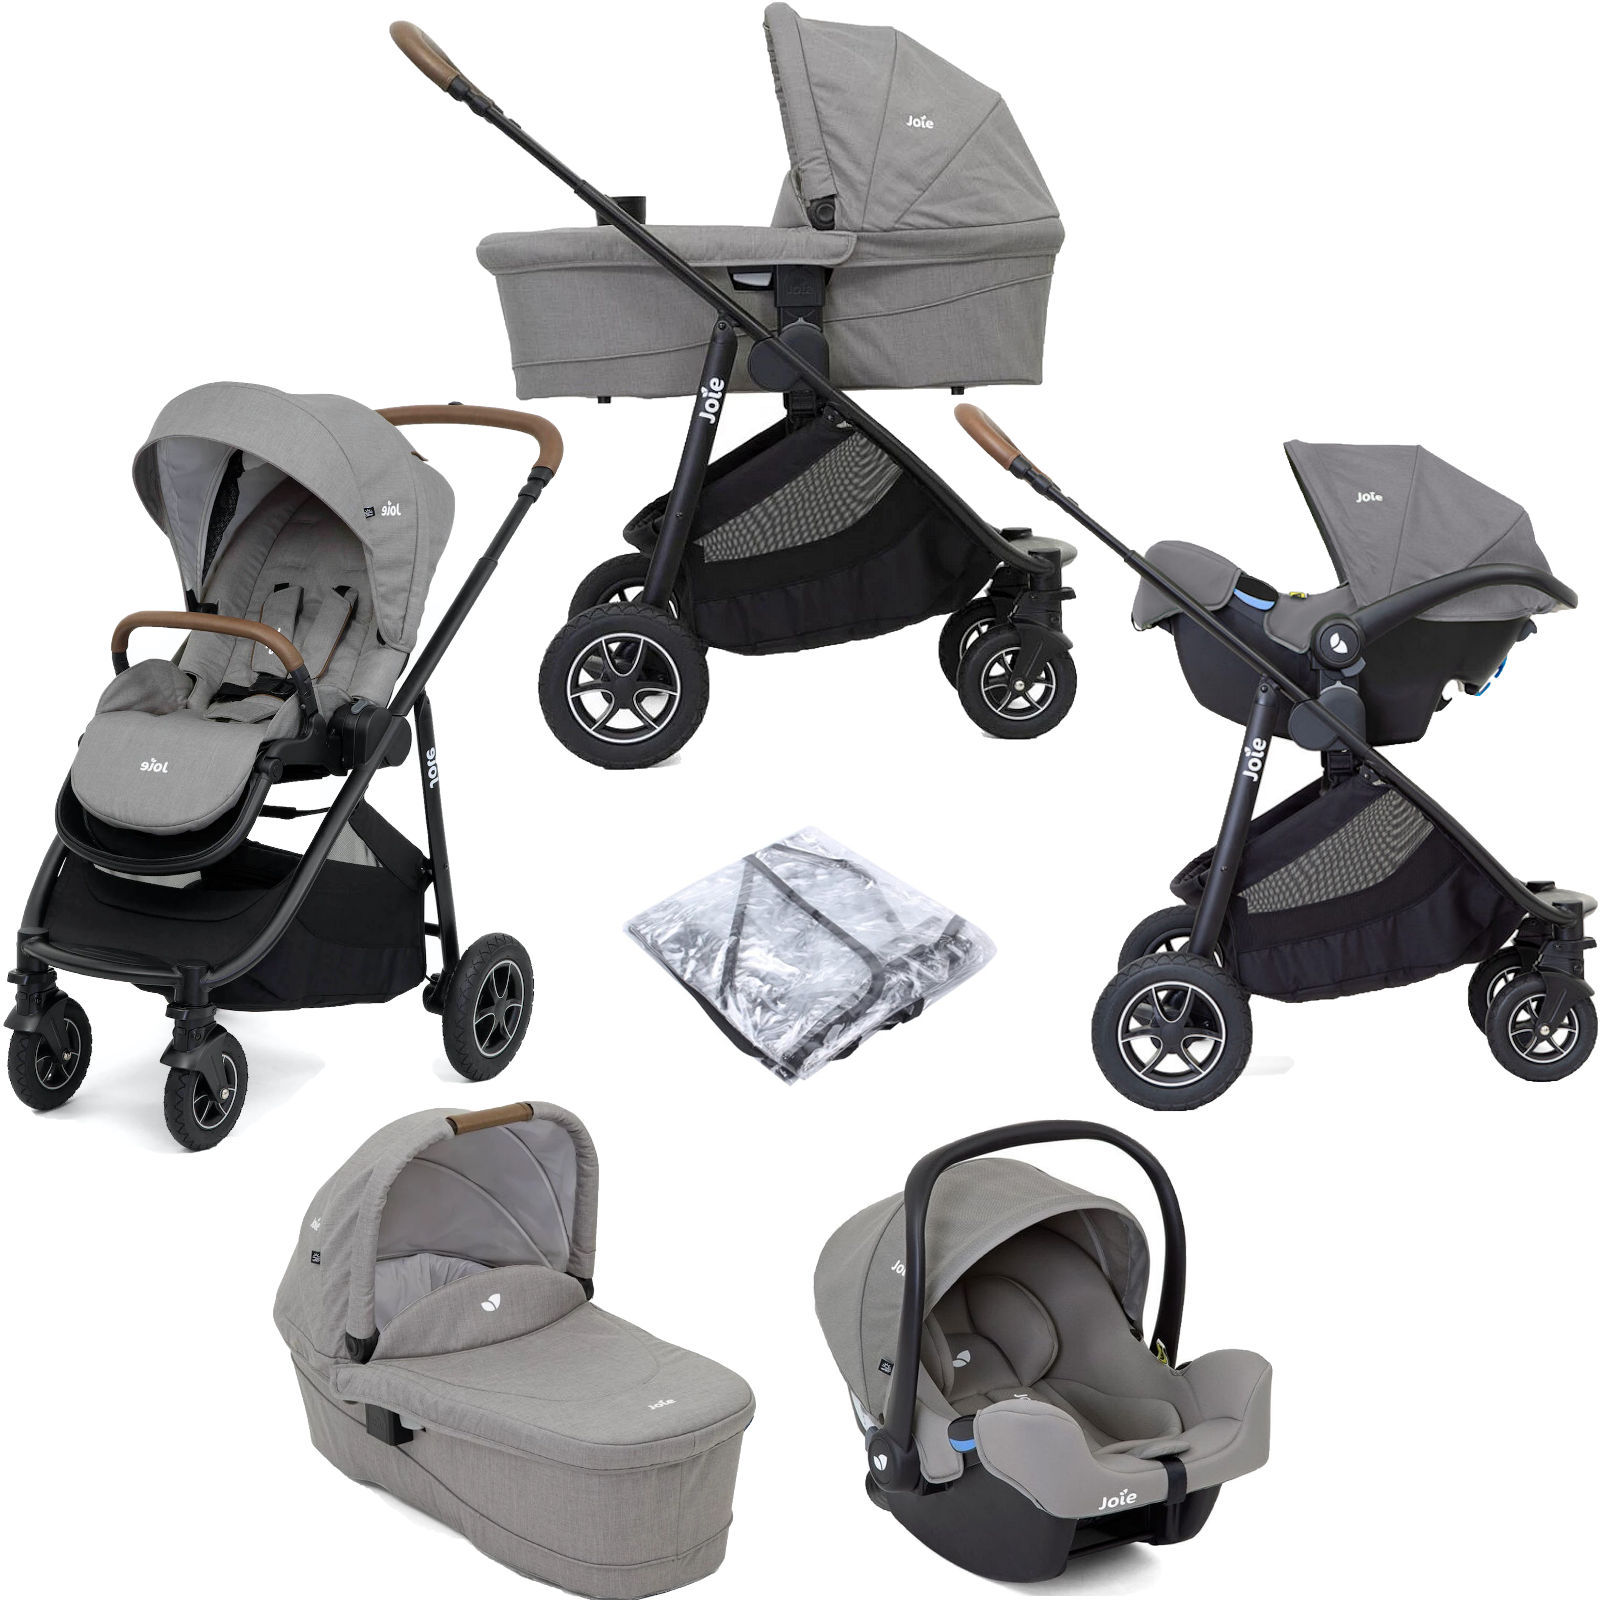 Joie Versatrax (i-Snug) Travel System with Carrycot - Grey Flannel